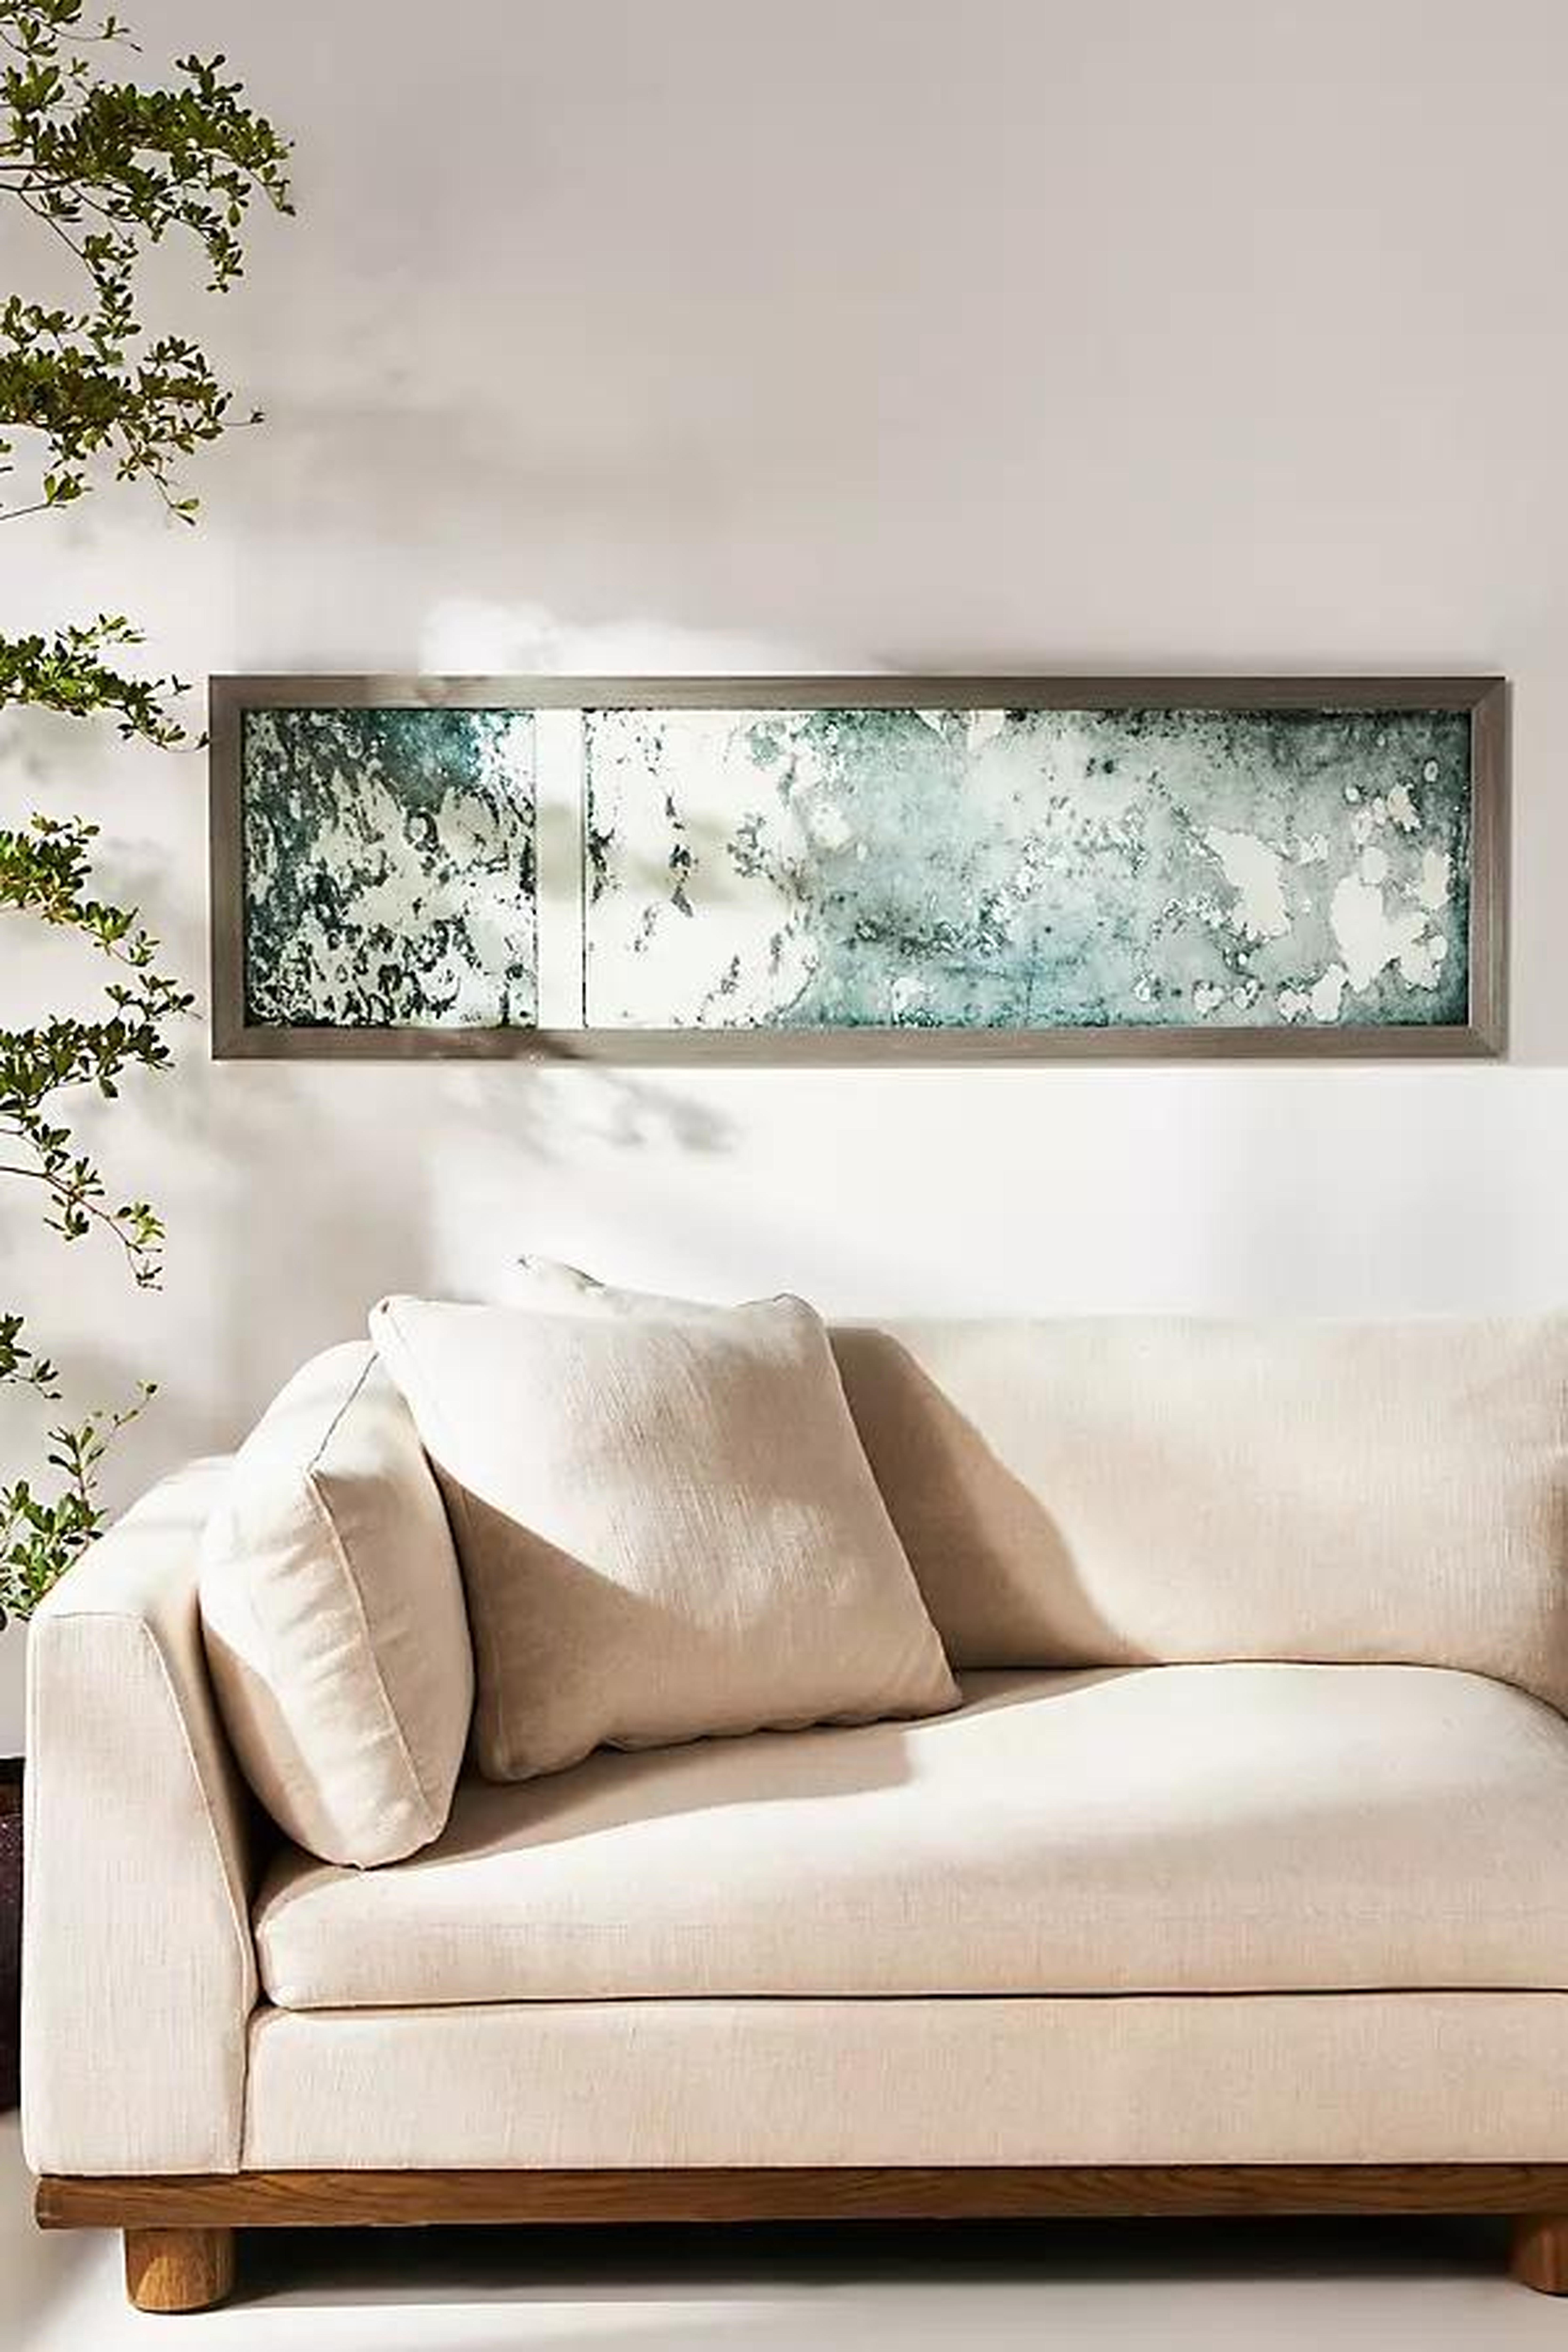 Sea Diptych Wall Art By Zoe Bios Creative in Green RESTOCK Late May 2022 - Anthropologie